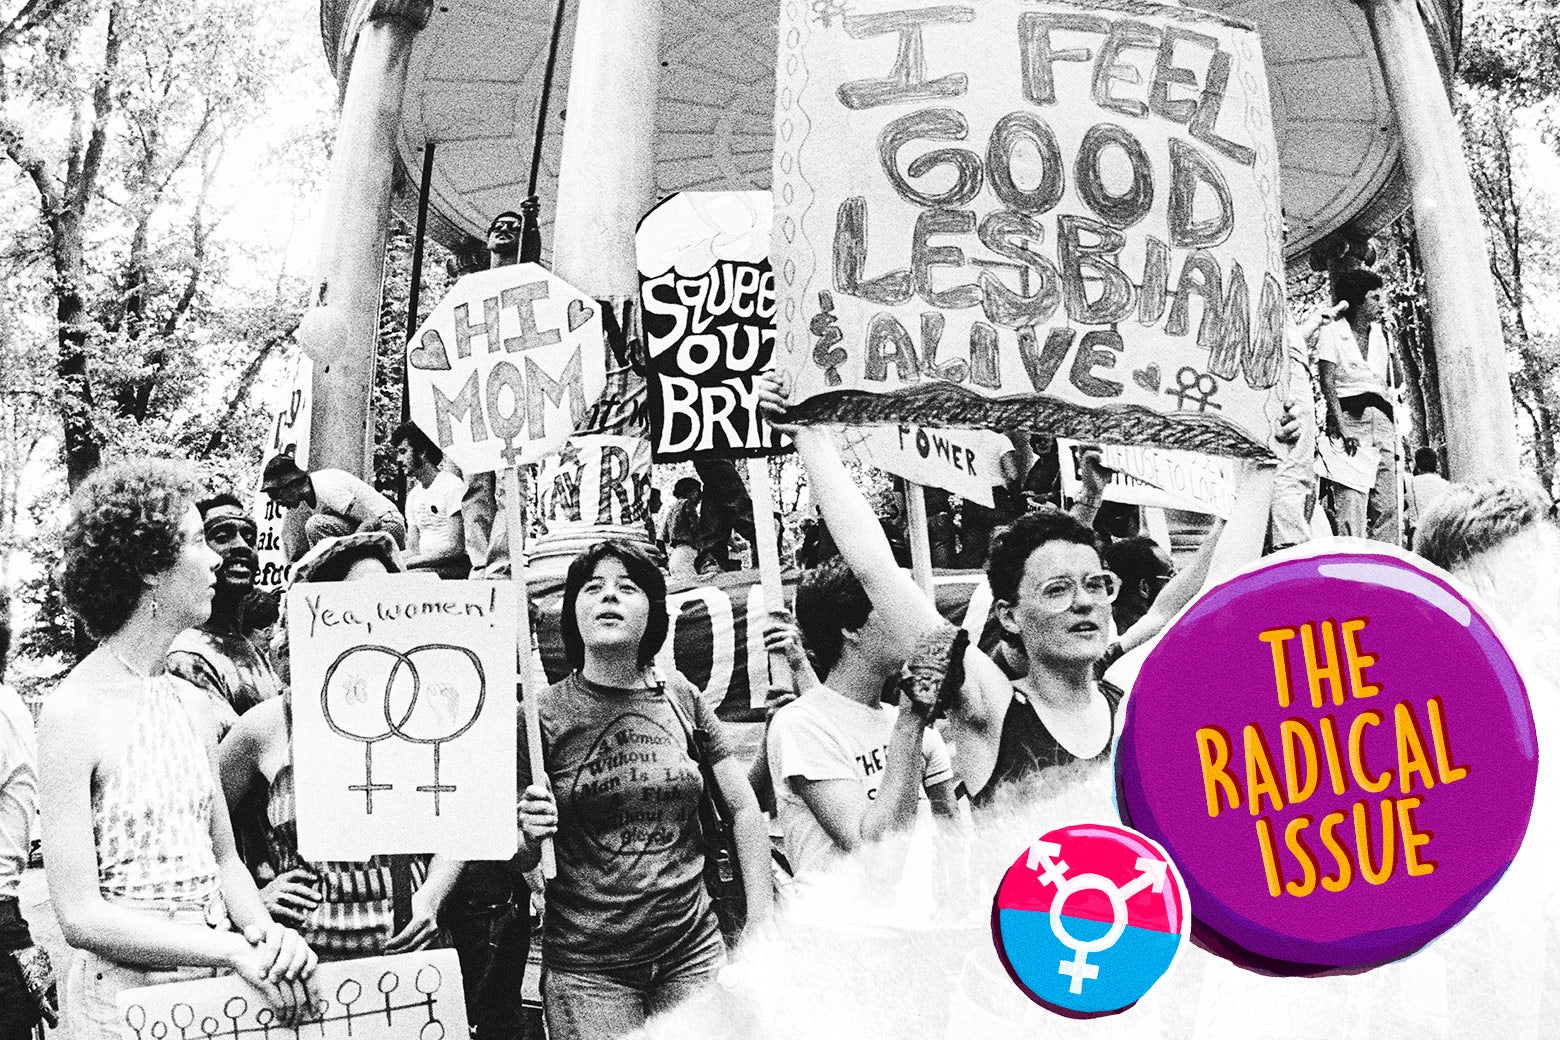 Lesbian rights activists carry signs with slogans such as "Yes, women!" and "I feel good, lesbian, and alive" with two Venus symbols.